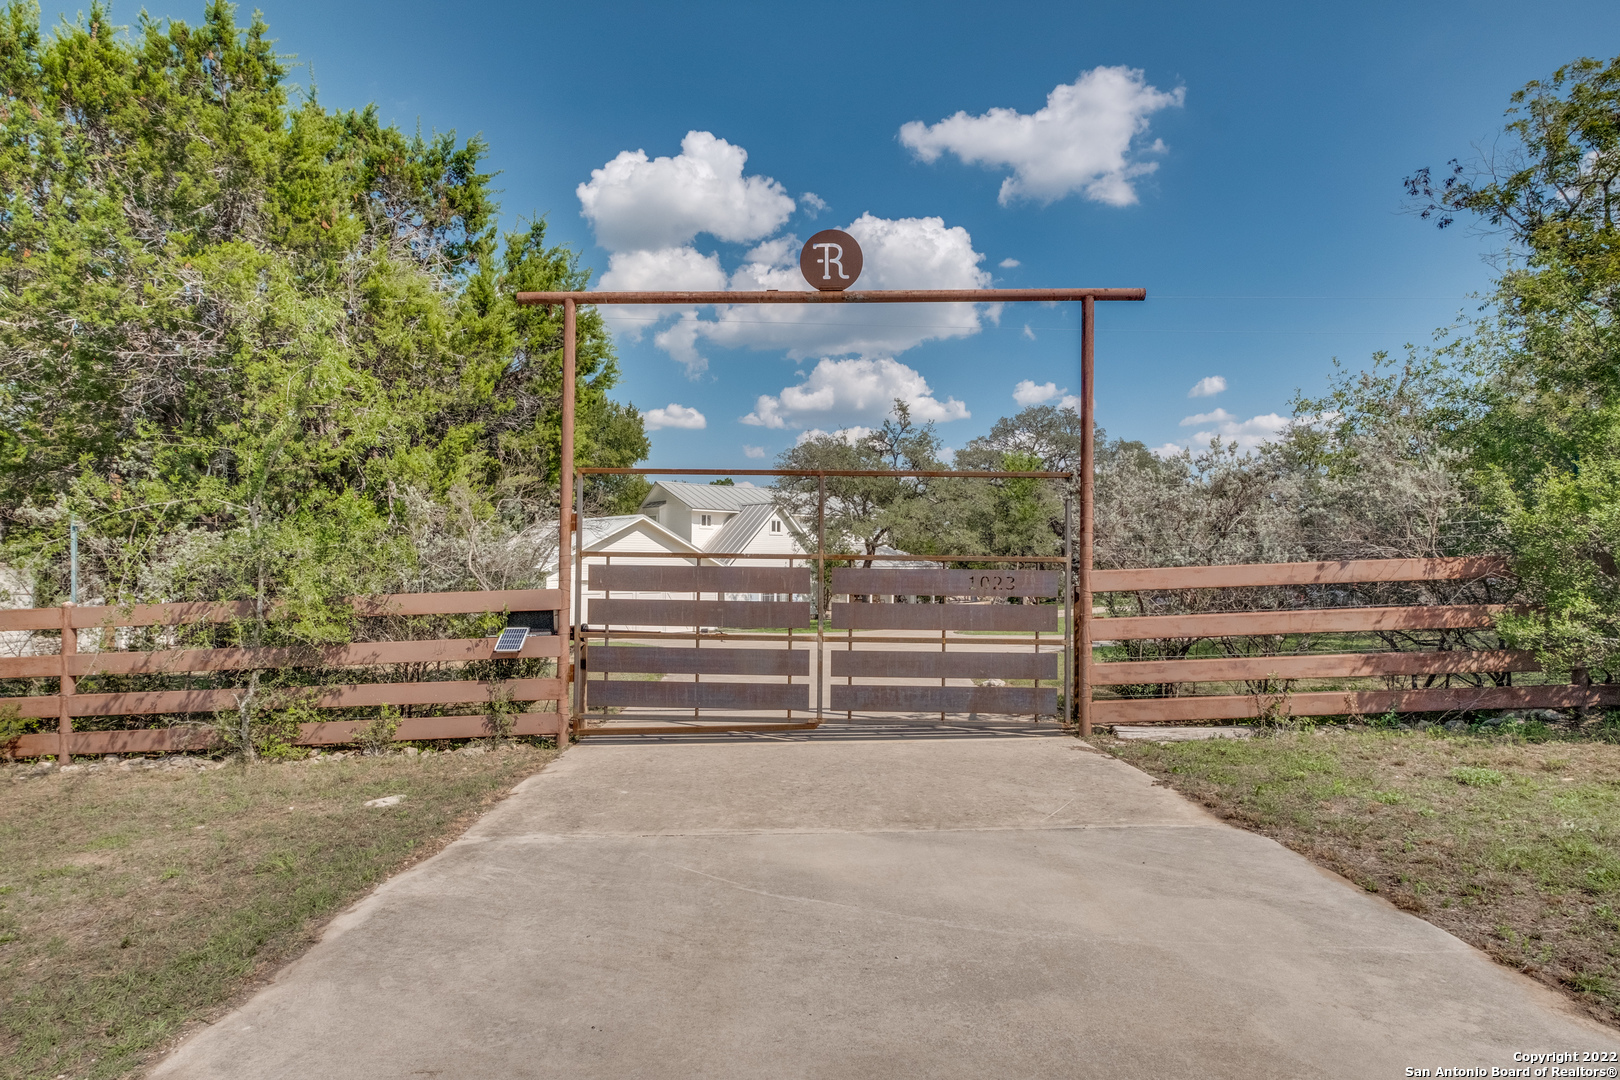 A Wow Horse Farm located 15 minutes to Boerne and just across the River from Sisterdale...several wineries are in the area(and about 30 minutes to Fredericksburg!)  Beautiful long range view to the pastures and beyond; Large 8 Stall Horse Barn (approx. 26' x 70') w/Quarters (Full Bath, Kitchen & Bedroom):  This is the type of Barn that is welcoming to spend time in...it is situated to catch the breezes and offers wide breezeways and covered area for equipment storage or gathering. Owner has hosted gatherings in the barn and outside spaces.  Property features multiple pastures, is completely fenced and offers excellent Coastal Hay production (60 to 70 Round Bales according to owner) plus a beautiful Hill Country backdrop.   Home is charming w/a flexible floorplan (2 Bedrooms w/Ensuite Baths on Main Level); Loft, 2 Bedrooms, Alcove & Full Bath on 2nd level.  Beautiful Beams in Great Room Area which opens to the Dining Area;   Kitchen is neutral and offers abundant counters; Full Length Screened Porch over looks rocked patio area w/Chimenea-style fireplace.  Raised Bed Gardens are located on the side of the home w/piped water proximity.  Detached 2 car garage and Well w/Storage Tank round out this special property.  NOTE:  Usage of this property is primarily Equestrian and Agricultural; not suited for hunting.